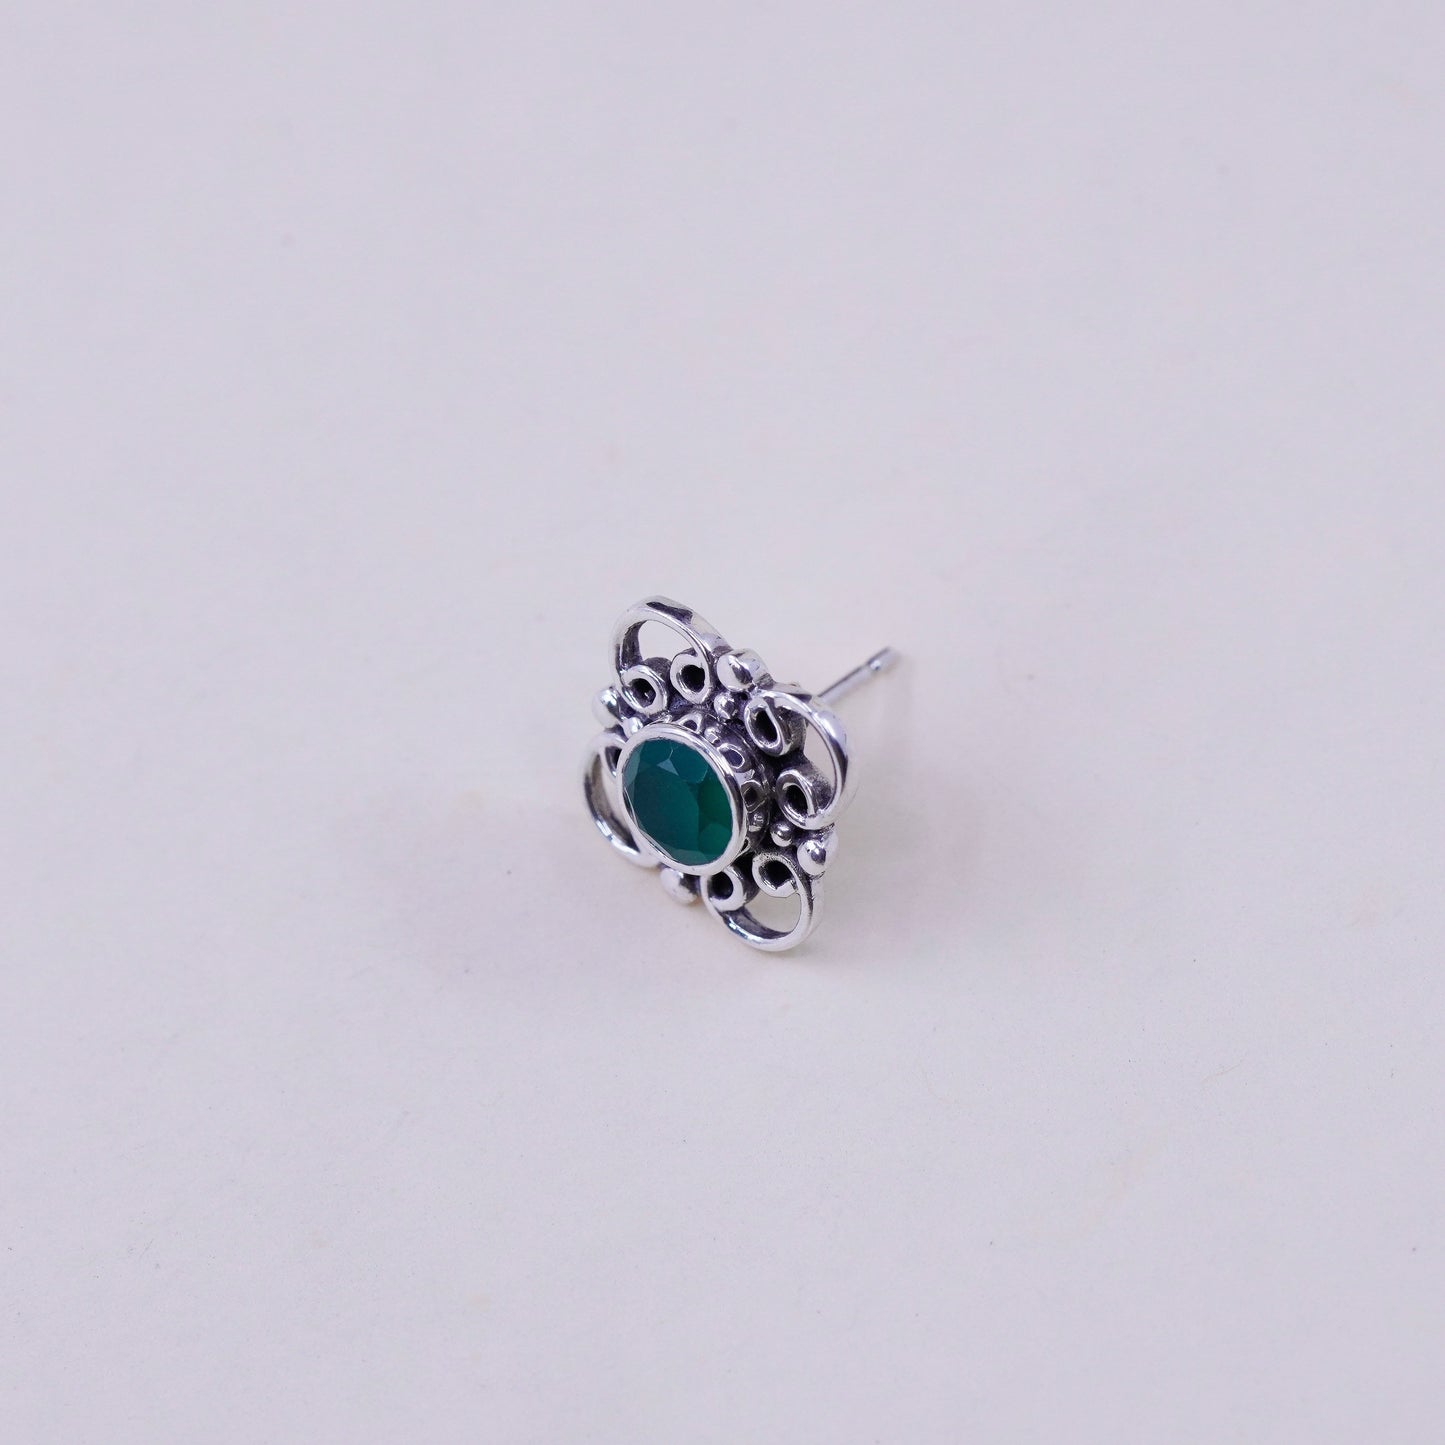 Vintage sterling 925 silver studs, minimalist earrings with emerald